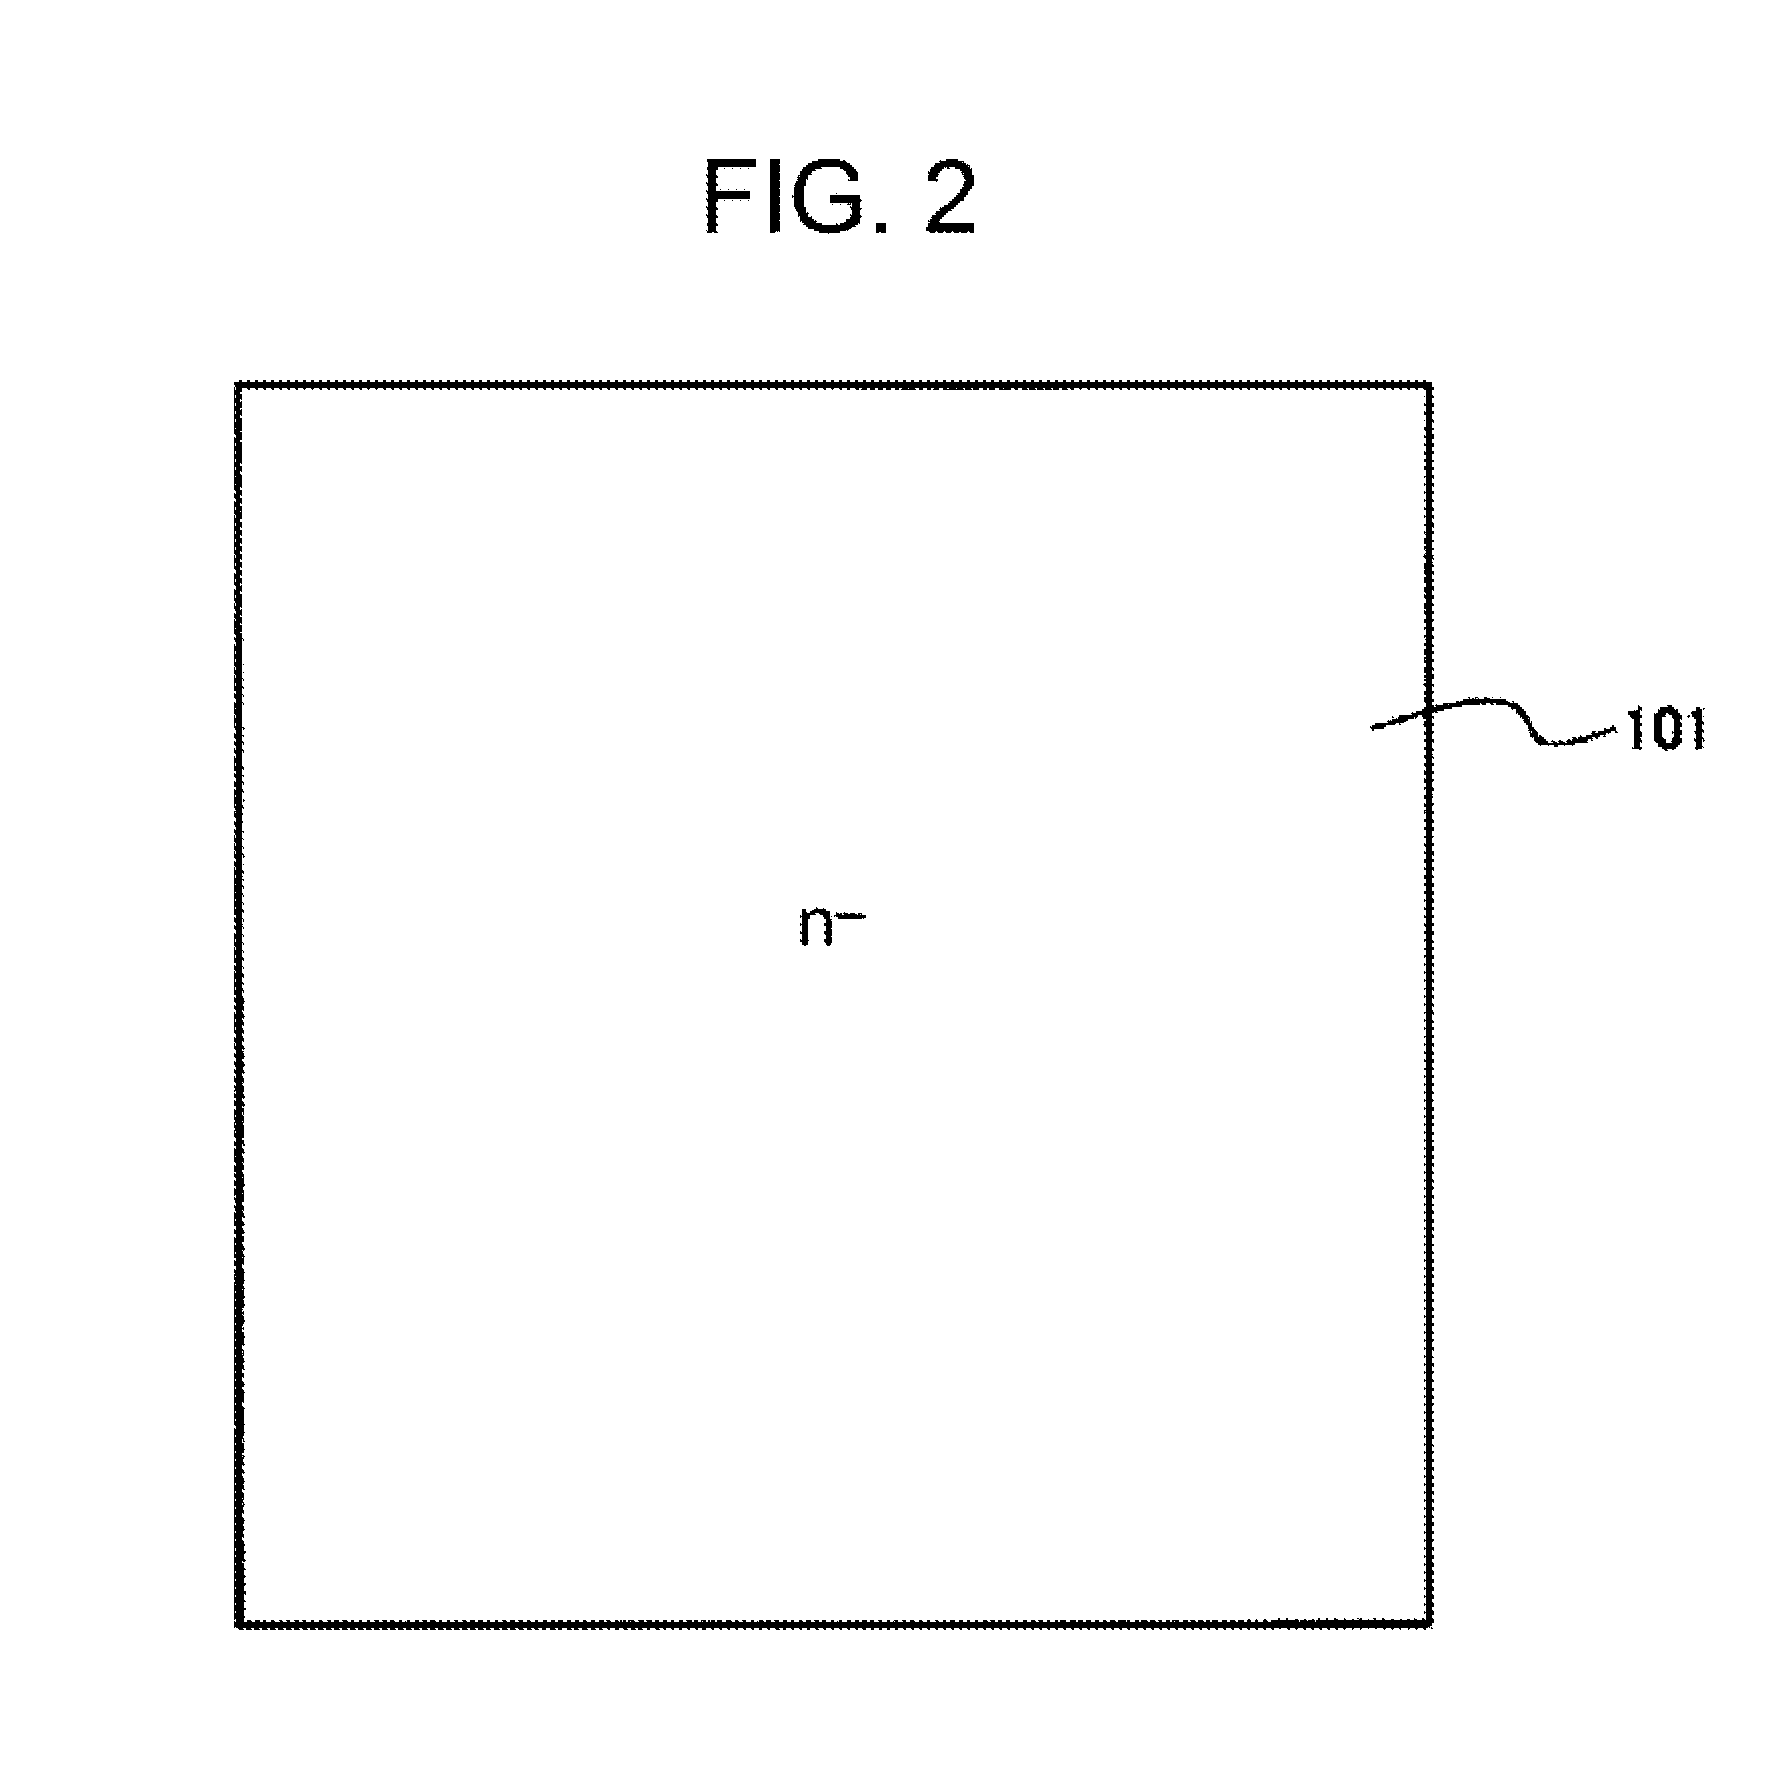 Production method for a semiconductor device